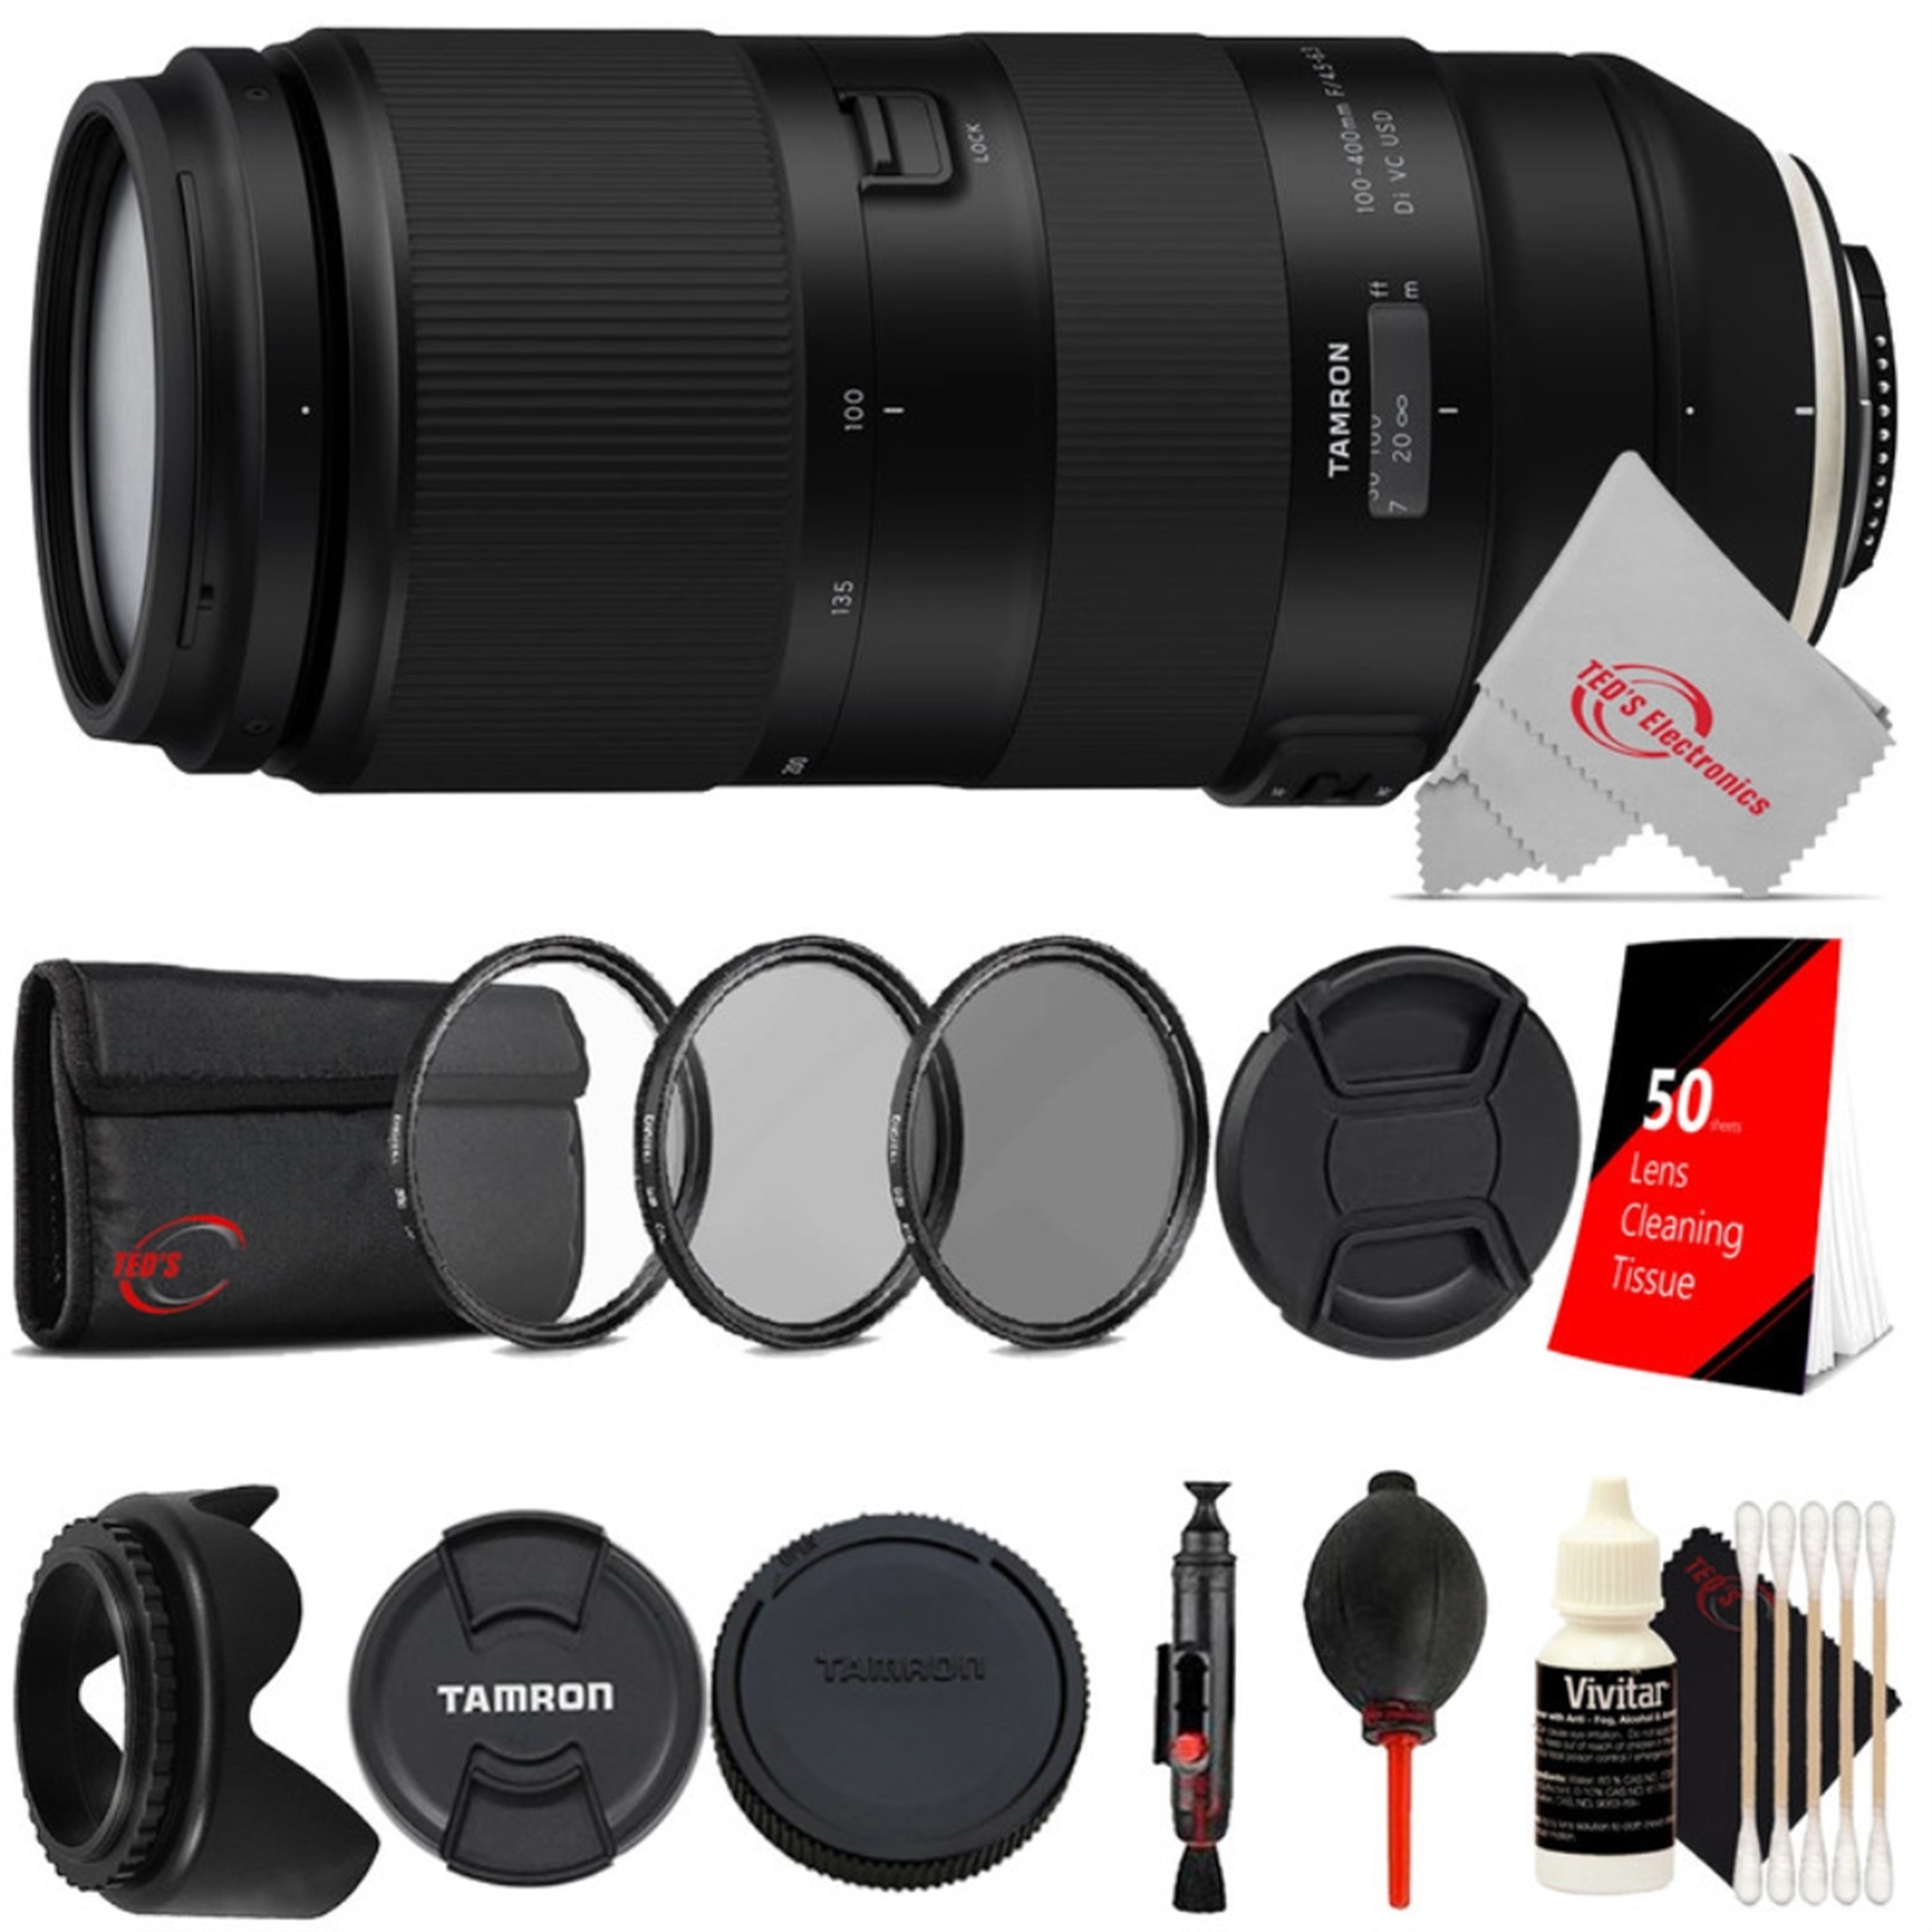 Tamron 100-400mm f/4.5-6.3 Di VC USD Image Stabilization Lens for